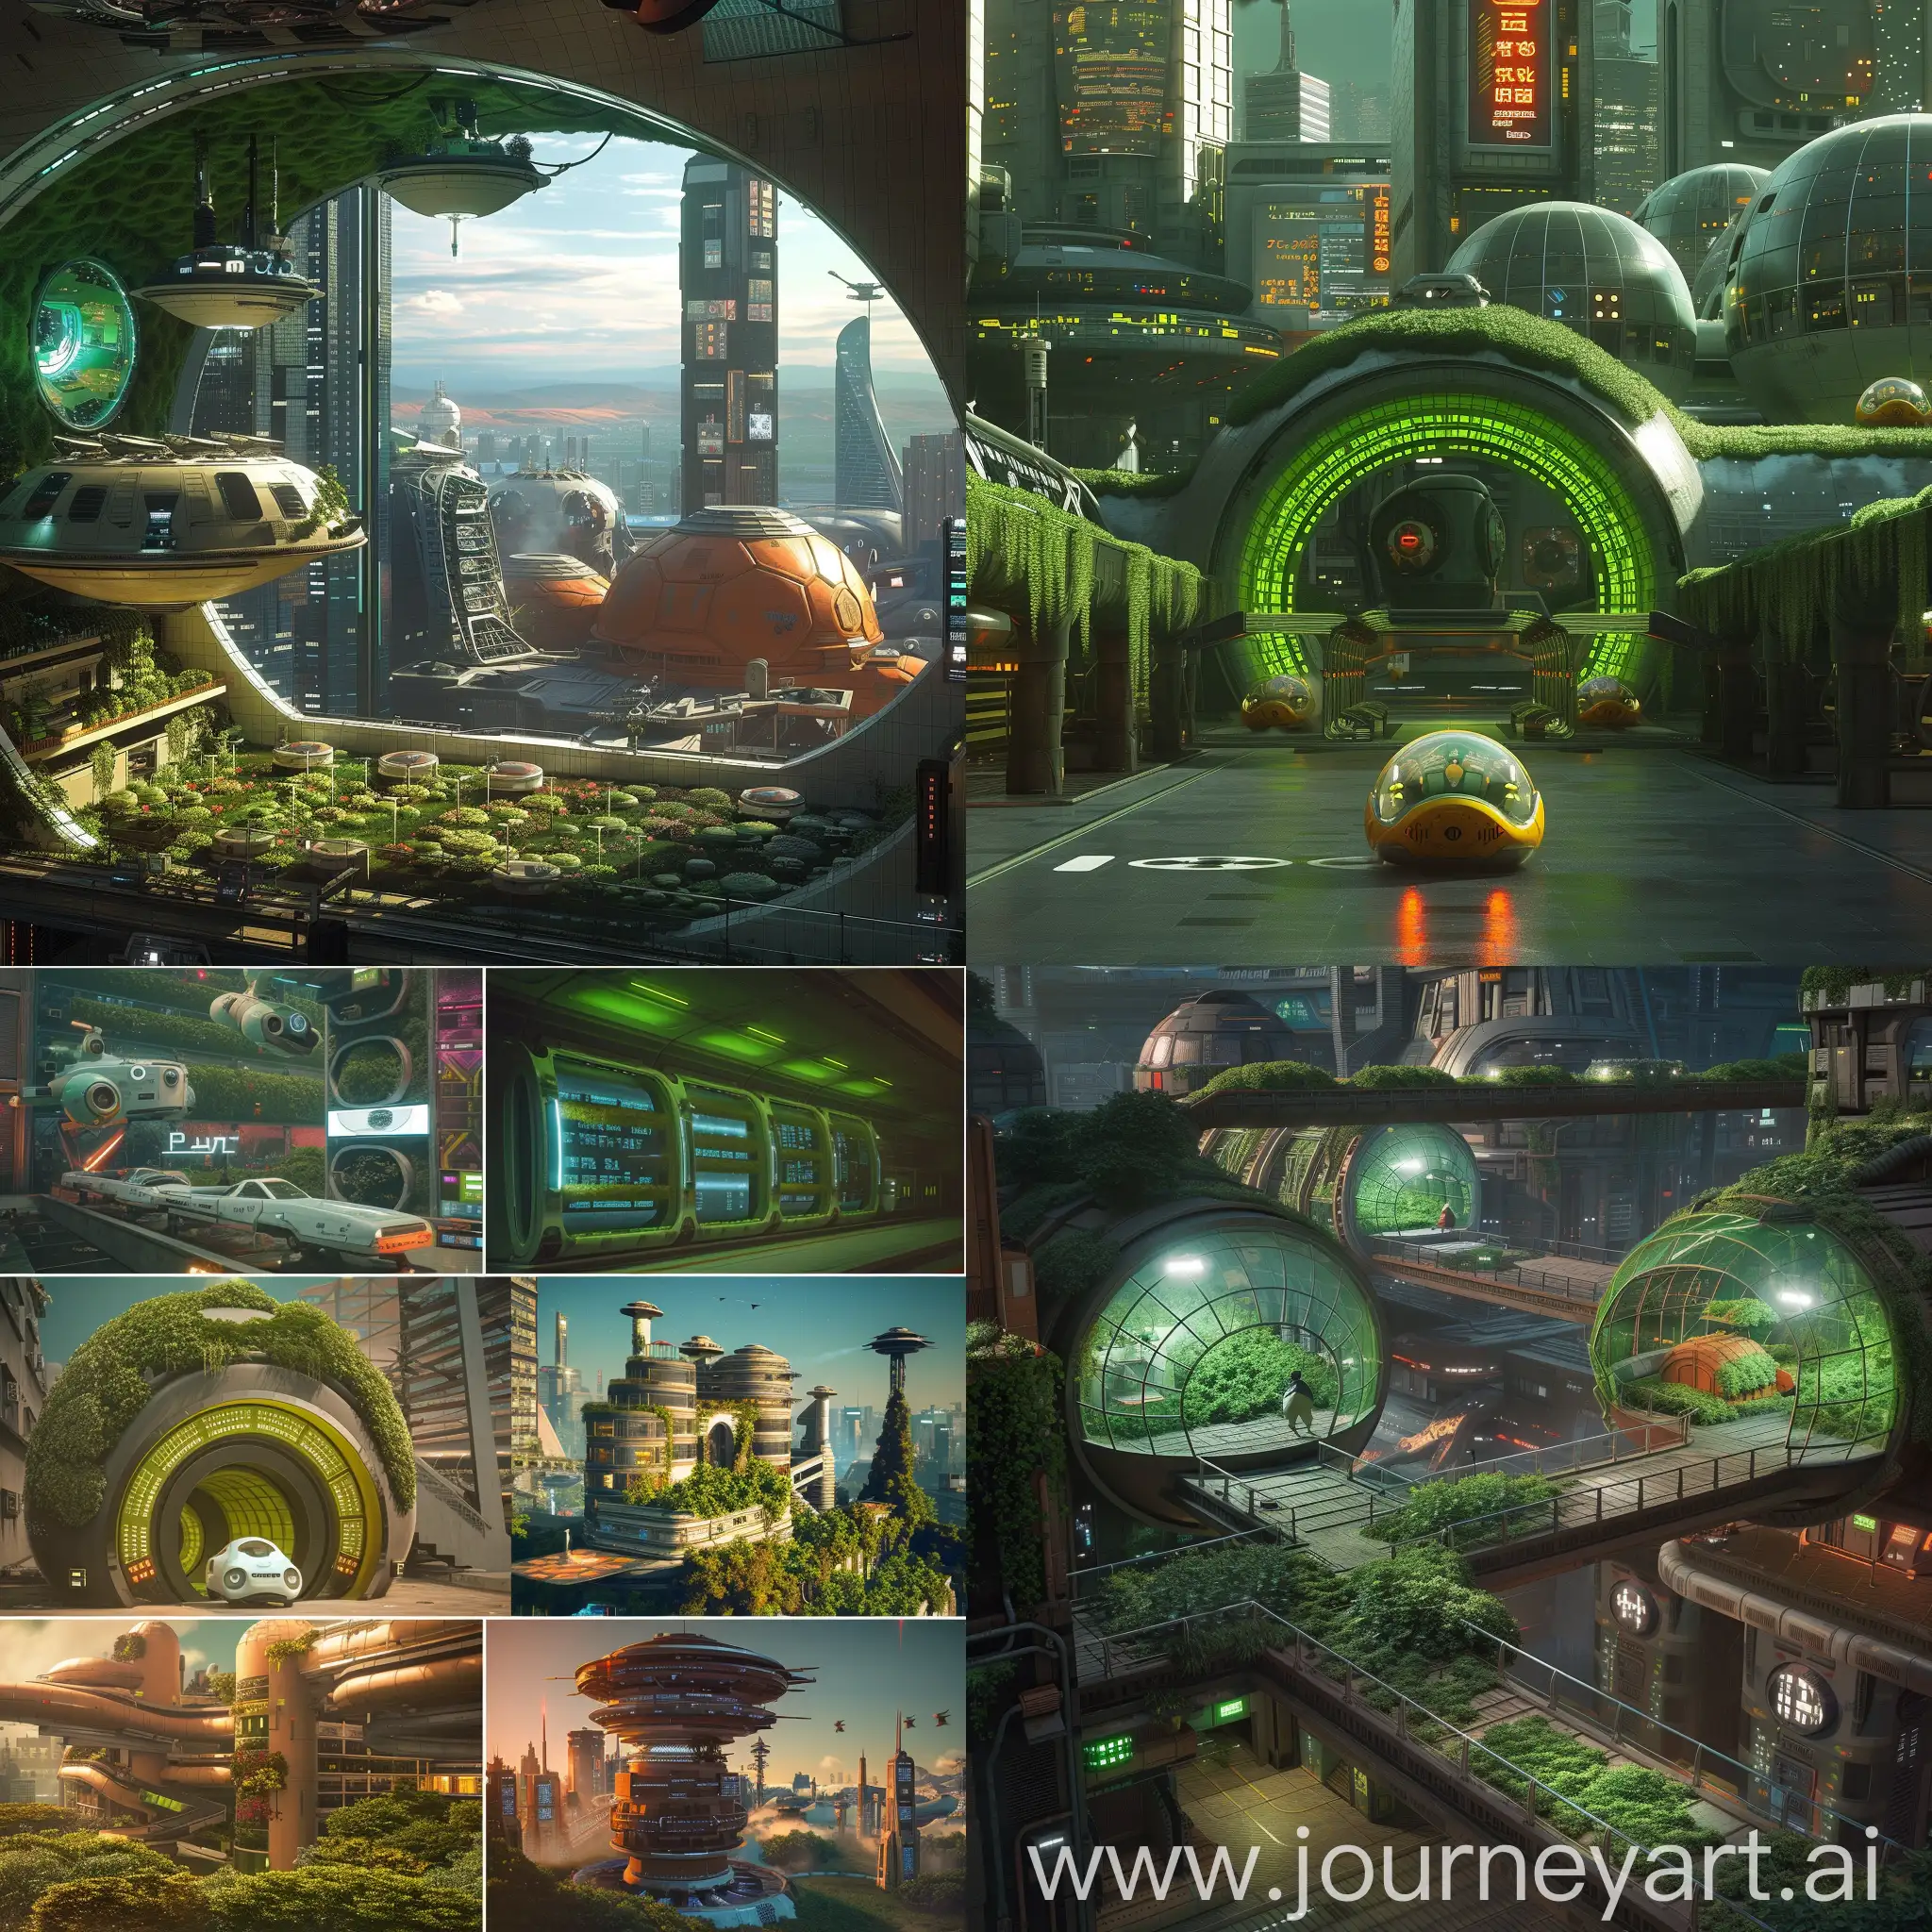 Futuristic-Moscow-Glowing-Green-Tunnels-and-Vertical-Gardens